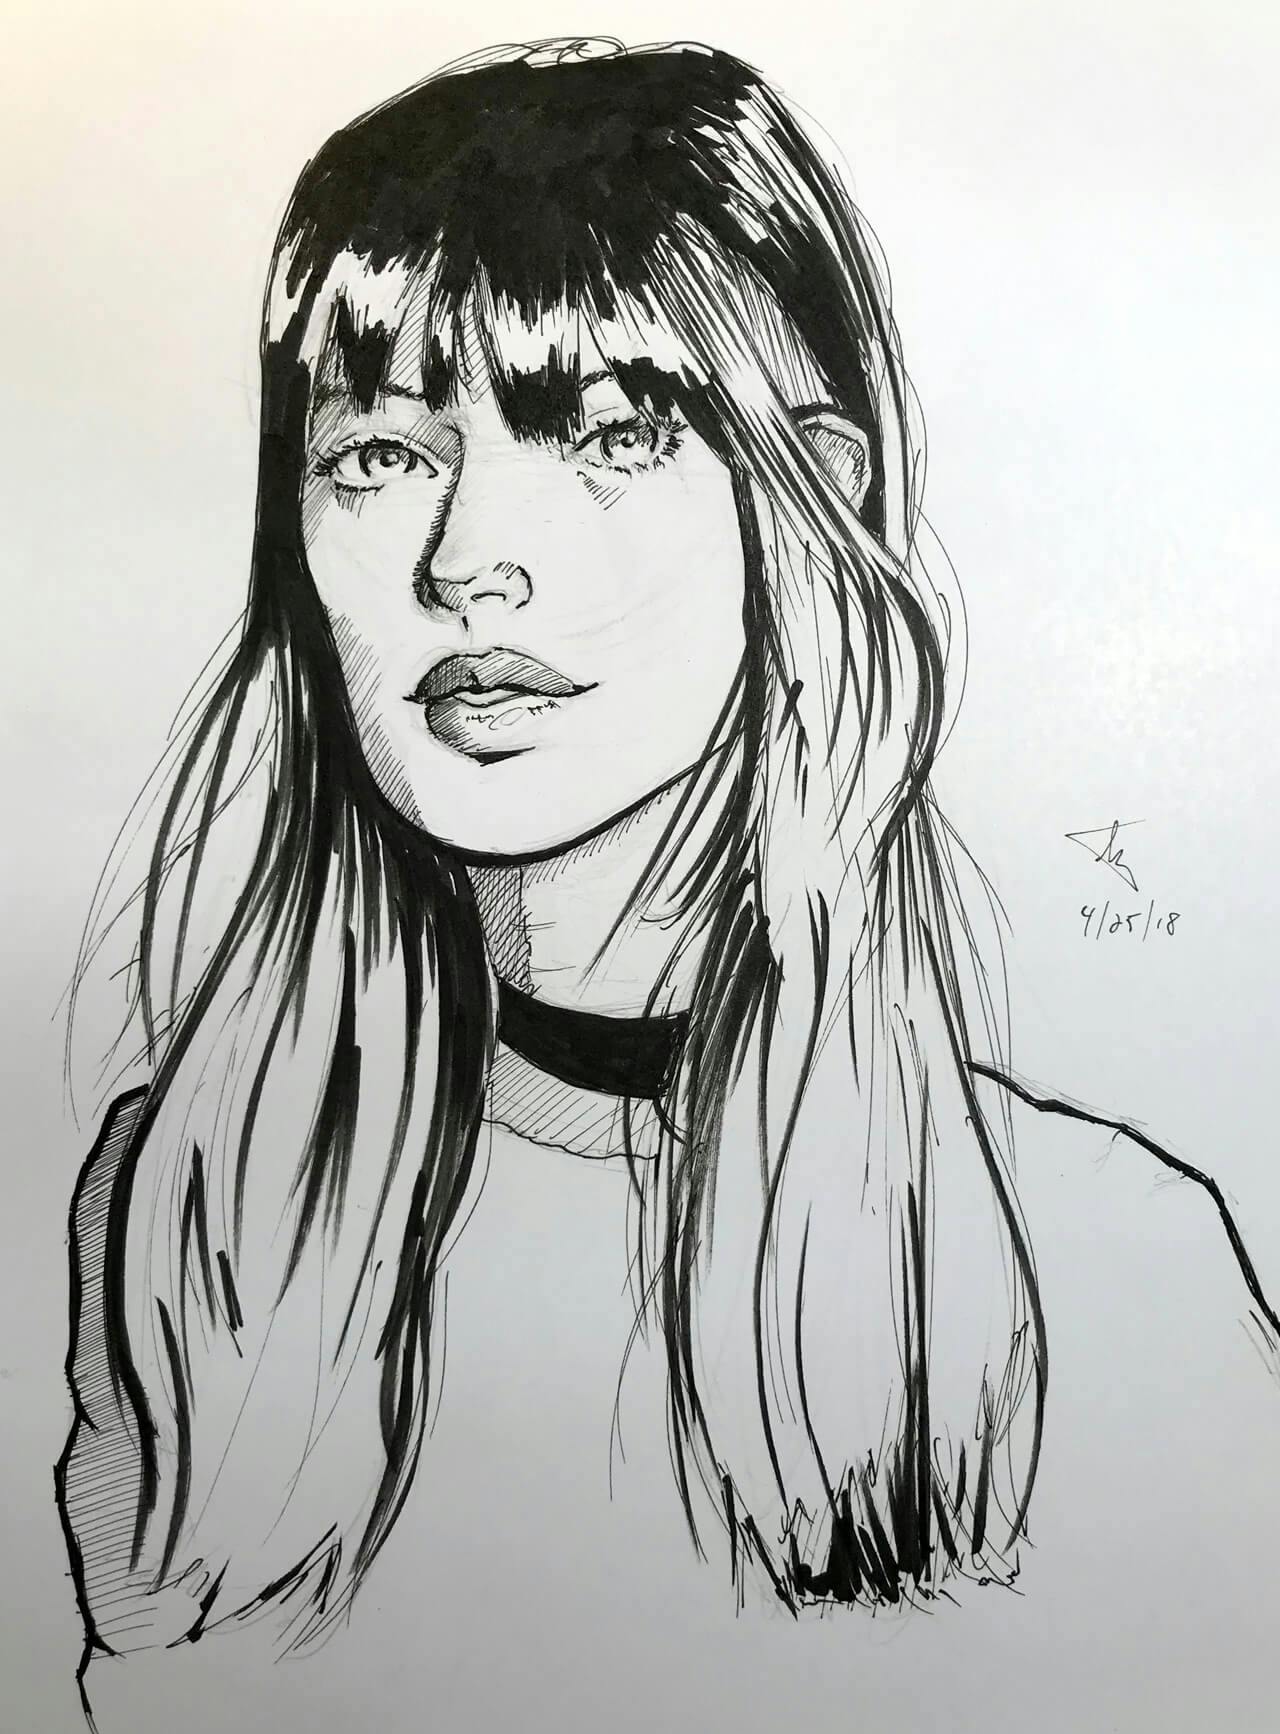 Pen & ink drawing, woman with long hair in choker necklace, looking straight ahead